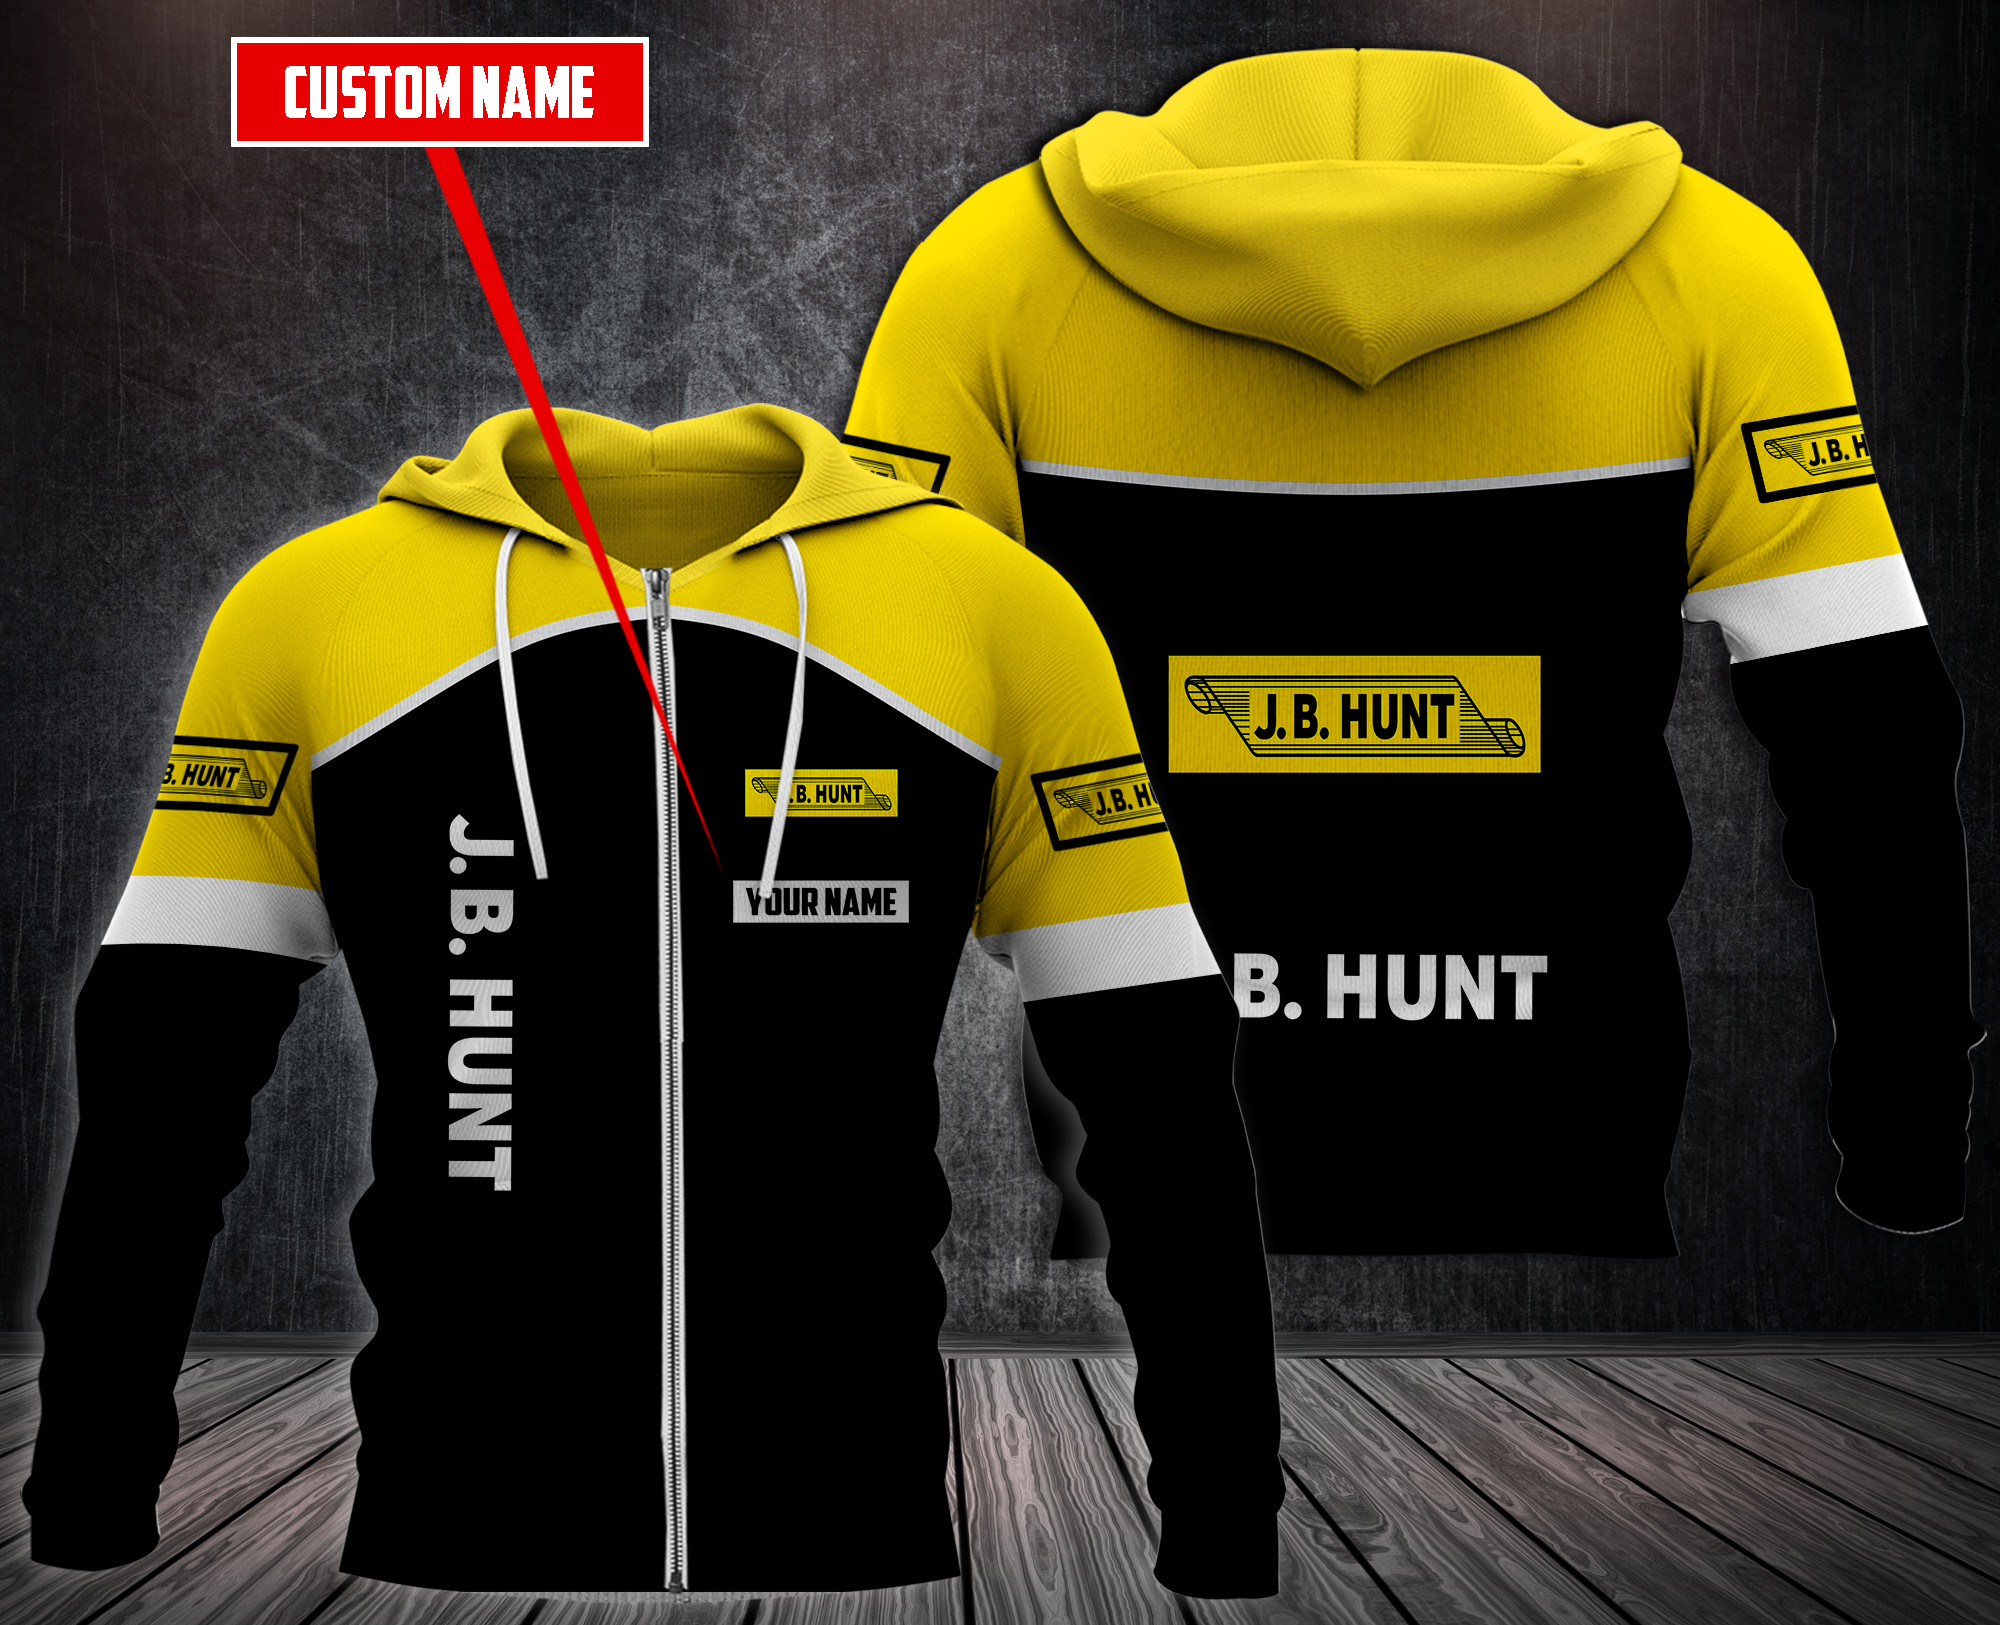 Choose the right hoodies for you on our boxboxshirt and ethershirt websites in 2022 130